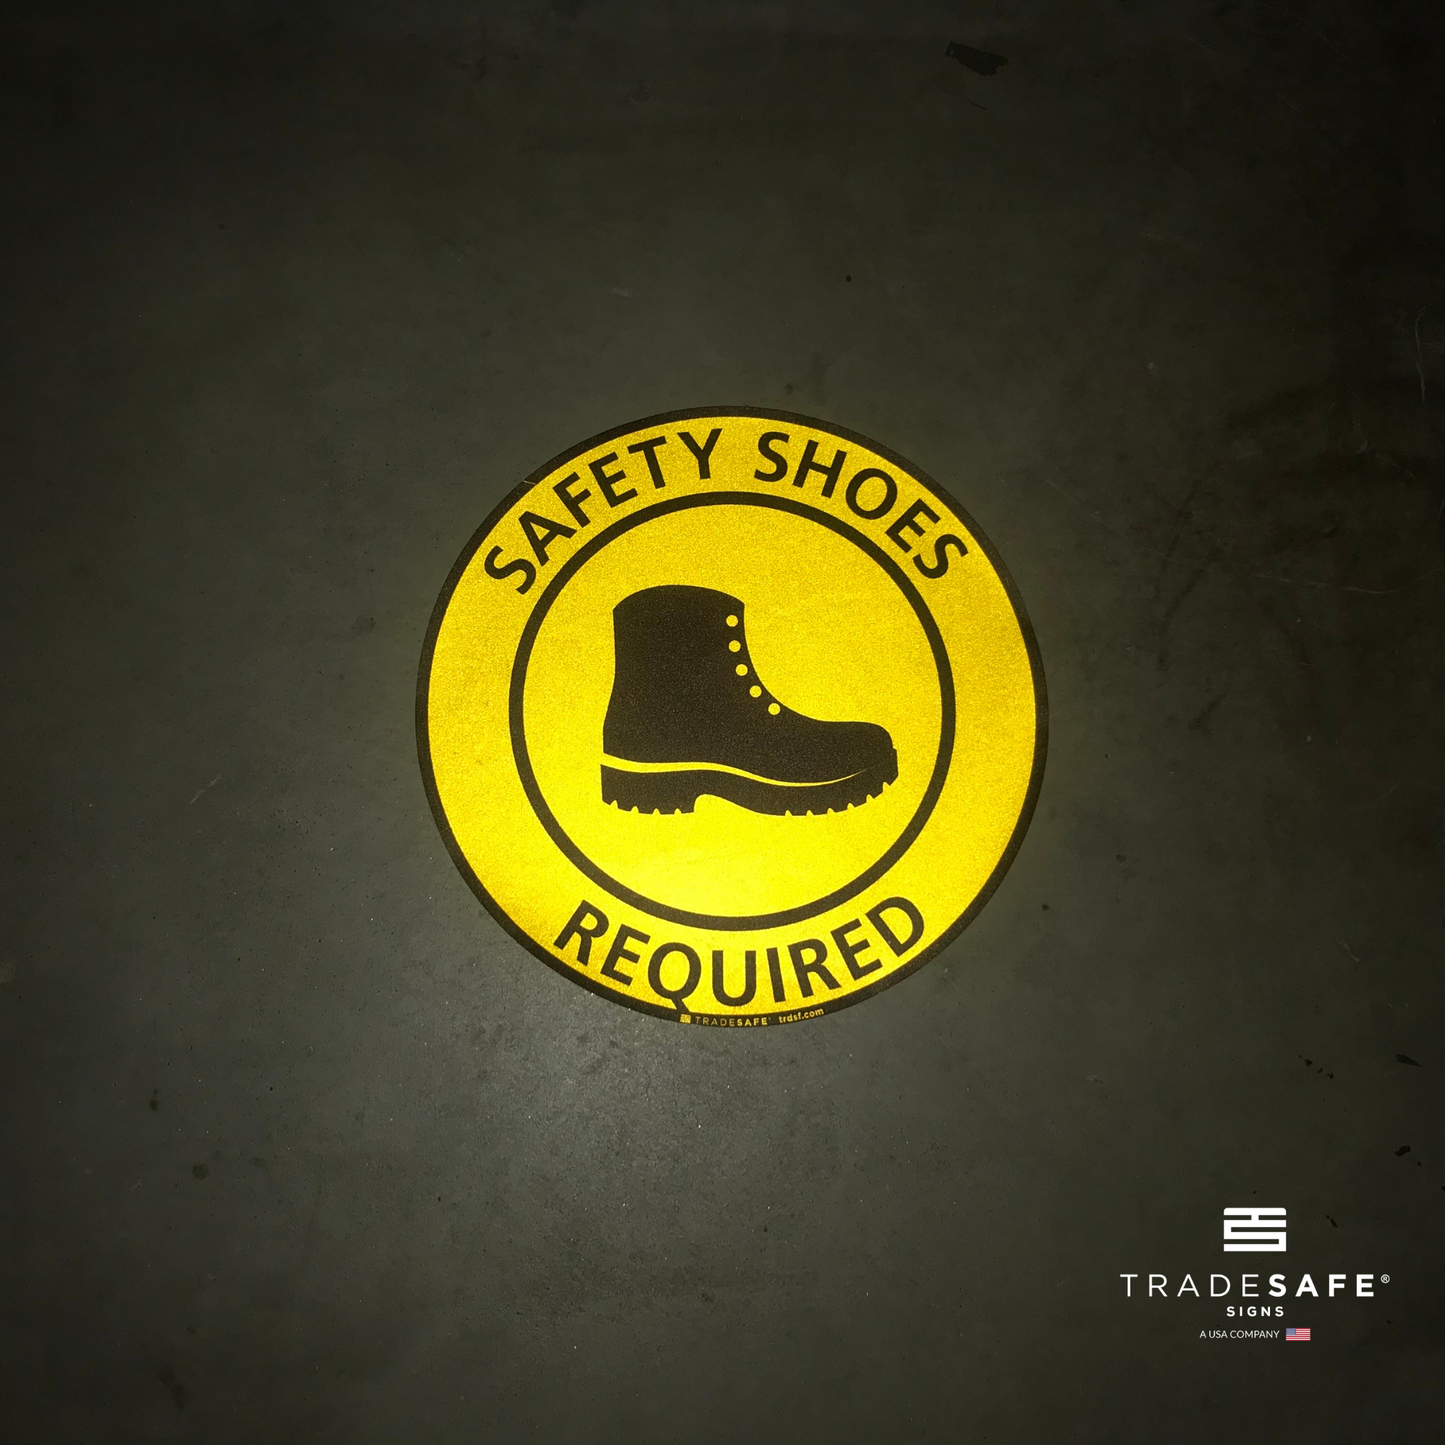 reflective attribute of adhesive vinyl safety shoes required sign on black background